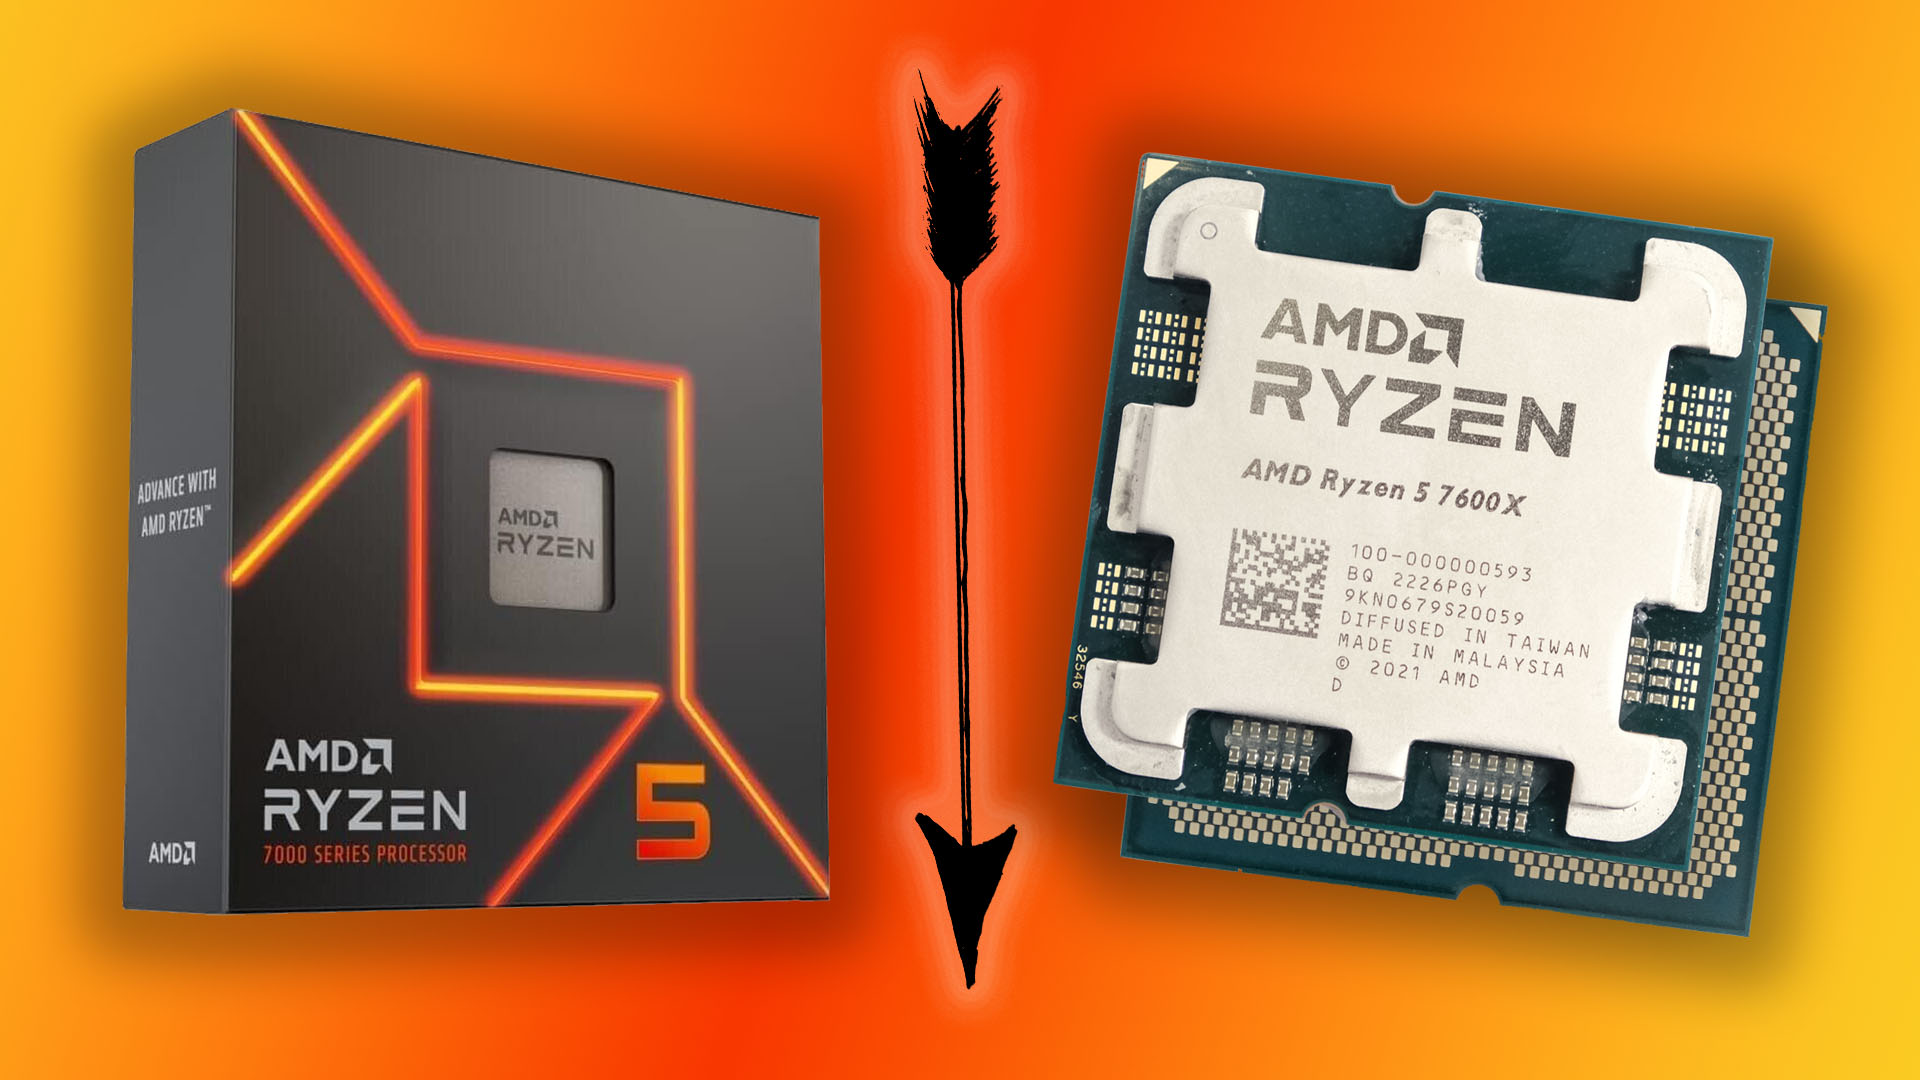 Quick, get an AMD Ryzen 5 7600X for $199 while you still can